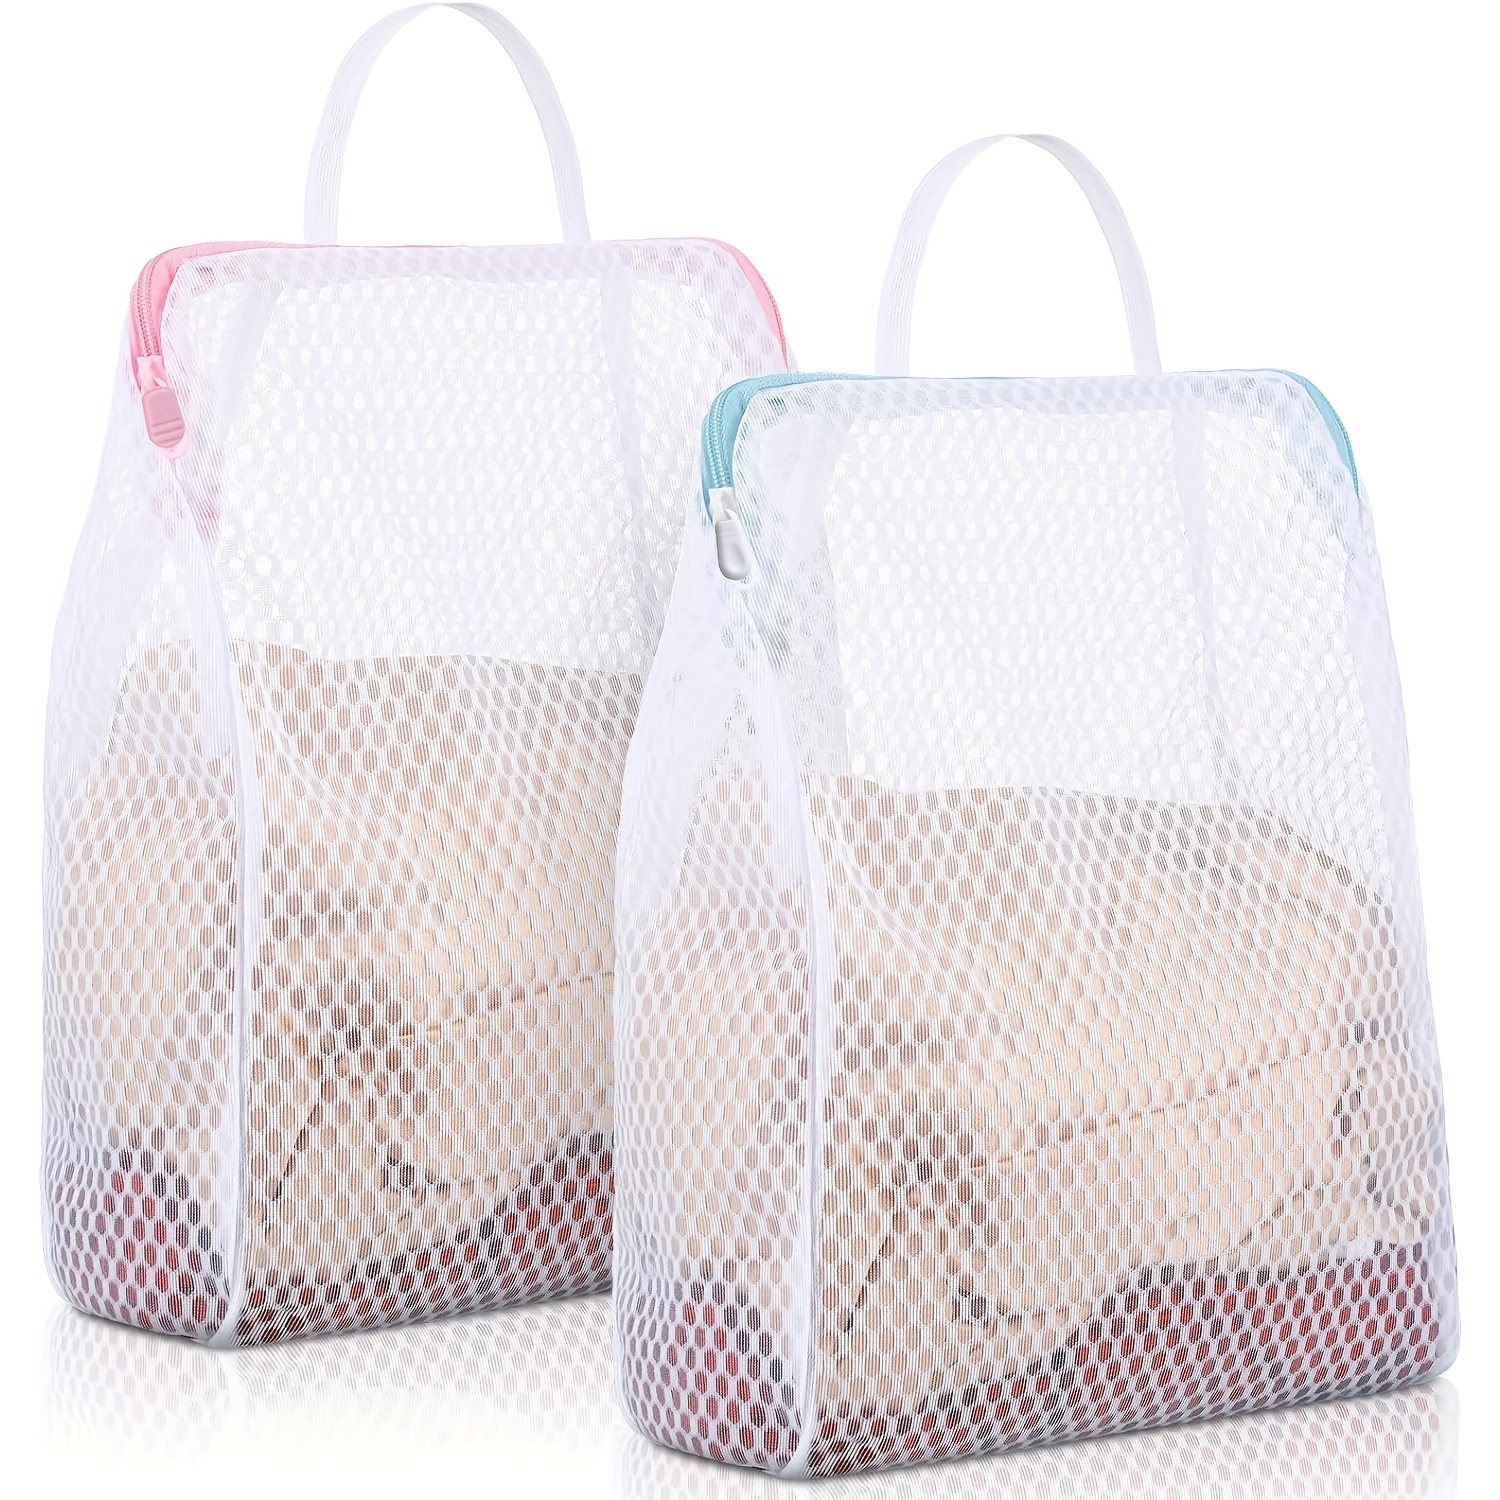 

2pcs Honeycomb Mesh Laundry Bag With Handle, 12 X 8 Inches, Delicate Bag For Washing Socks, Underwear, And Travel Clothing, Available In Pink And Blue